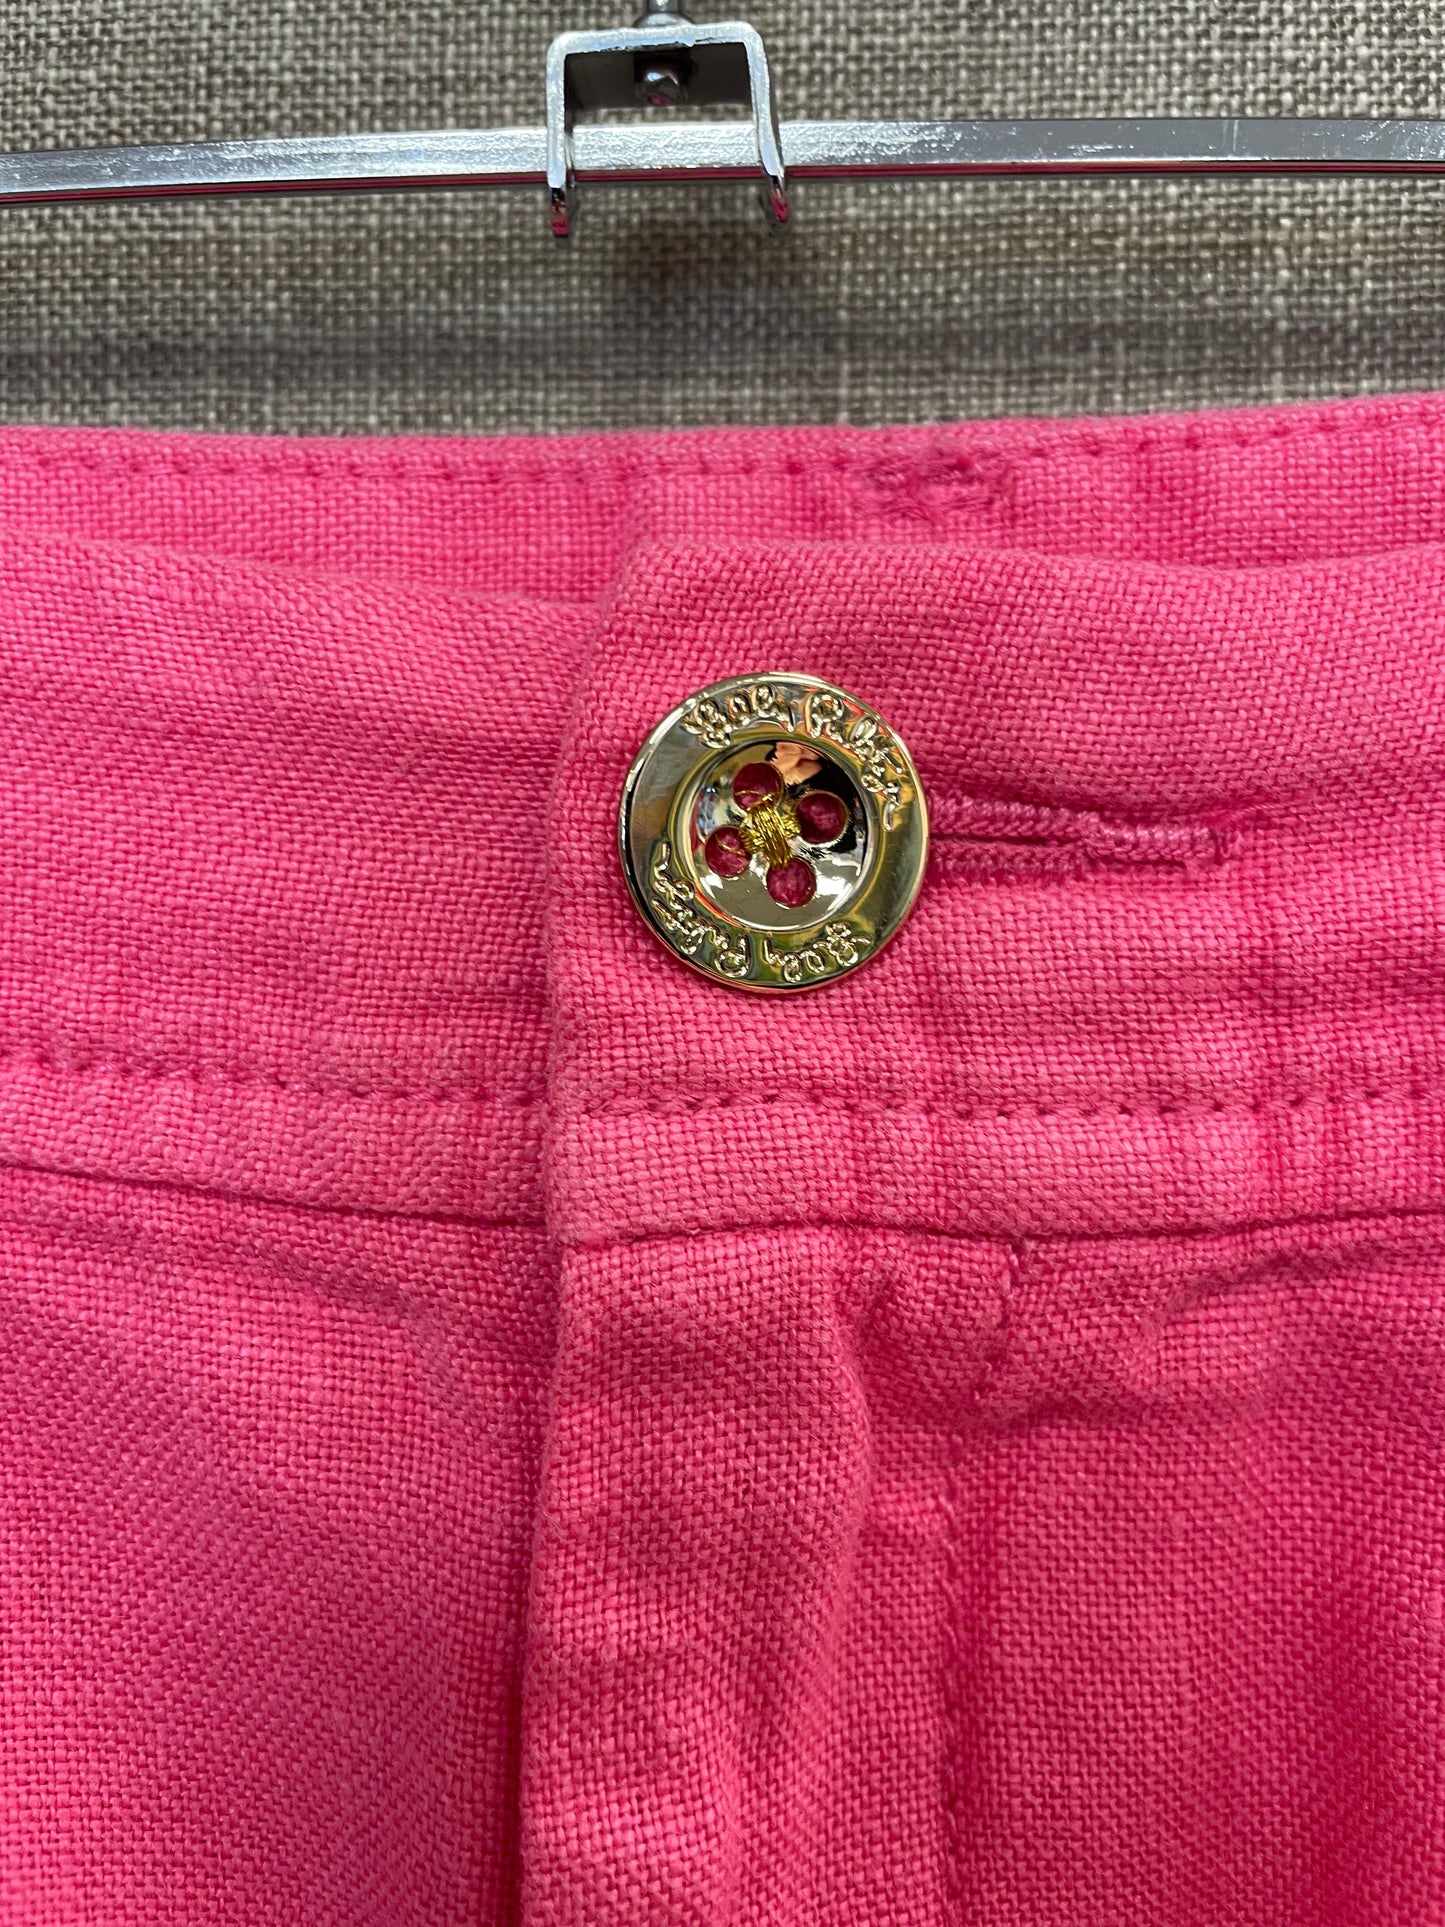 Lilly Pulitzer Pink Linen Shorts Size 6 Small